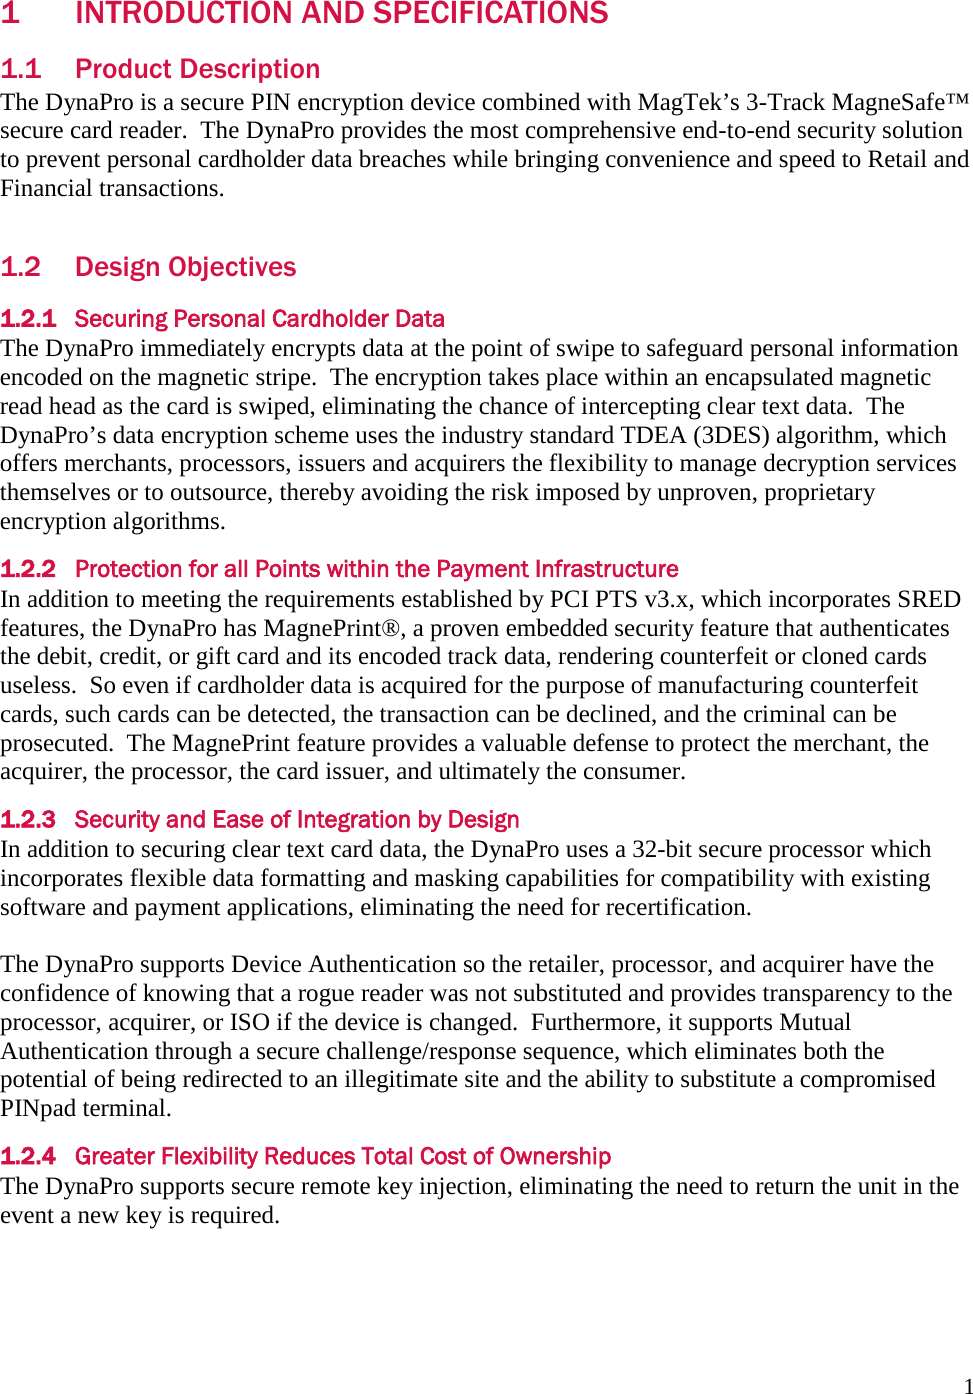  1 1 INTRODUCTION AND SPECIFICATIONS 1.1 Product Description The DynaPro is a secure PIN encryption device combined with MagTek’s 3-Track MagneSafe™ secure card reader.  The DynaPro provides the most comprehensive end-to-end security solution to prevent personal cardholder data breaches while bringing convenience and speed to Retail and Financial transactions.  1.2 Design Objectives 1.2.1 Securing Personal Cardholder Data The DynaPro immediately encrypts data at the point of swipe to safeguard personal information encoded on the magnetic stripe.  The encryption takes place within an encapsulated magnetic read head as the card is swiped, eliminating the chance of intercepting clear text data.  The DynaPro’s data encryption scheme uses the industry standard TDEA (3DES) algorithm, which offers merchants, processors, issuers and acquirers the flexibility to manage decryption services themselves or to outsource, thereby avoiding the risk imposed by unproven, proprietary encryption algorithms. 1.2.2 Protection for all Points within the Payment Infrastructure In addition to meeting the requirements established by PCI PTS v3.x, which incorporates SRED features, the DynaPro has MagnePrint®, a proven embedded security feature that authenticates the debit, credit, or gift card and its encoded track data, rendering counterfeit or cloned cards useless.  So even if cardholder data is acquired for the purpose of manufacturing counterfeit cards, such cards can be detected, the transaction can be declined, and the criminal can be prosecuted.  The MagnePrint feature provides a valuable defense to protect the merchant, the acquirer, the processor, the card issuer, and ultimately the consumer. 1.2.3 Security and Ease of Integration by Design In addition to securing clear text card data, the DynaPro uses a 32-bit secure processor which incorporates flexible data formatting and masking capabilities for compatibility with existing software and payment applications, eliminating the need for recertification.  The DynaPro supports Device Authentication so the retailer, processor, and acquirer have the confidence of knowing that a rogue reader was not substituted and provides transparency to the processor, acquirer, or ISO if the device is changed.  Furthermore, it supports Mutual Authentication through a secure challenge/response sequence, which eliminates both the potential of being redirected to an illegitimate site and the ability to substitute a compromised PINpad terminal. 1.2.4 Greater Flexibility Reduces Total Cost of Ownership The DynaPro supports secure remote key injection, eliminating the need to return the unit in the event a new key is required. 